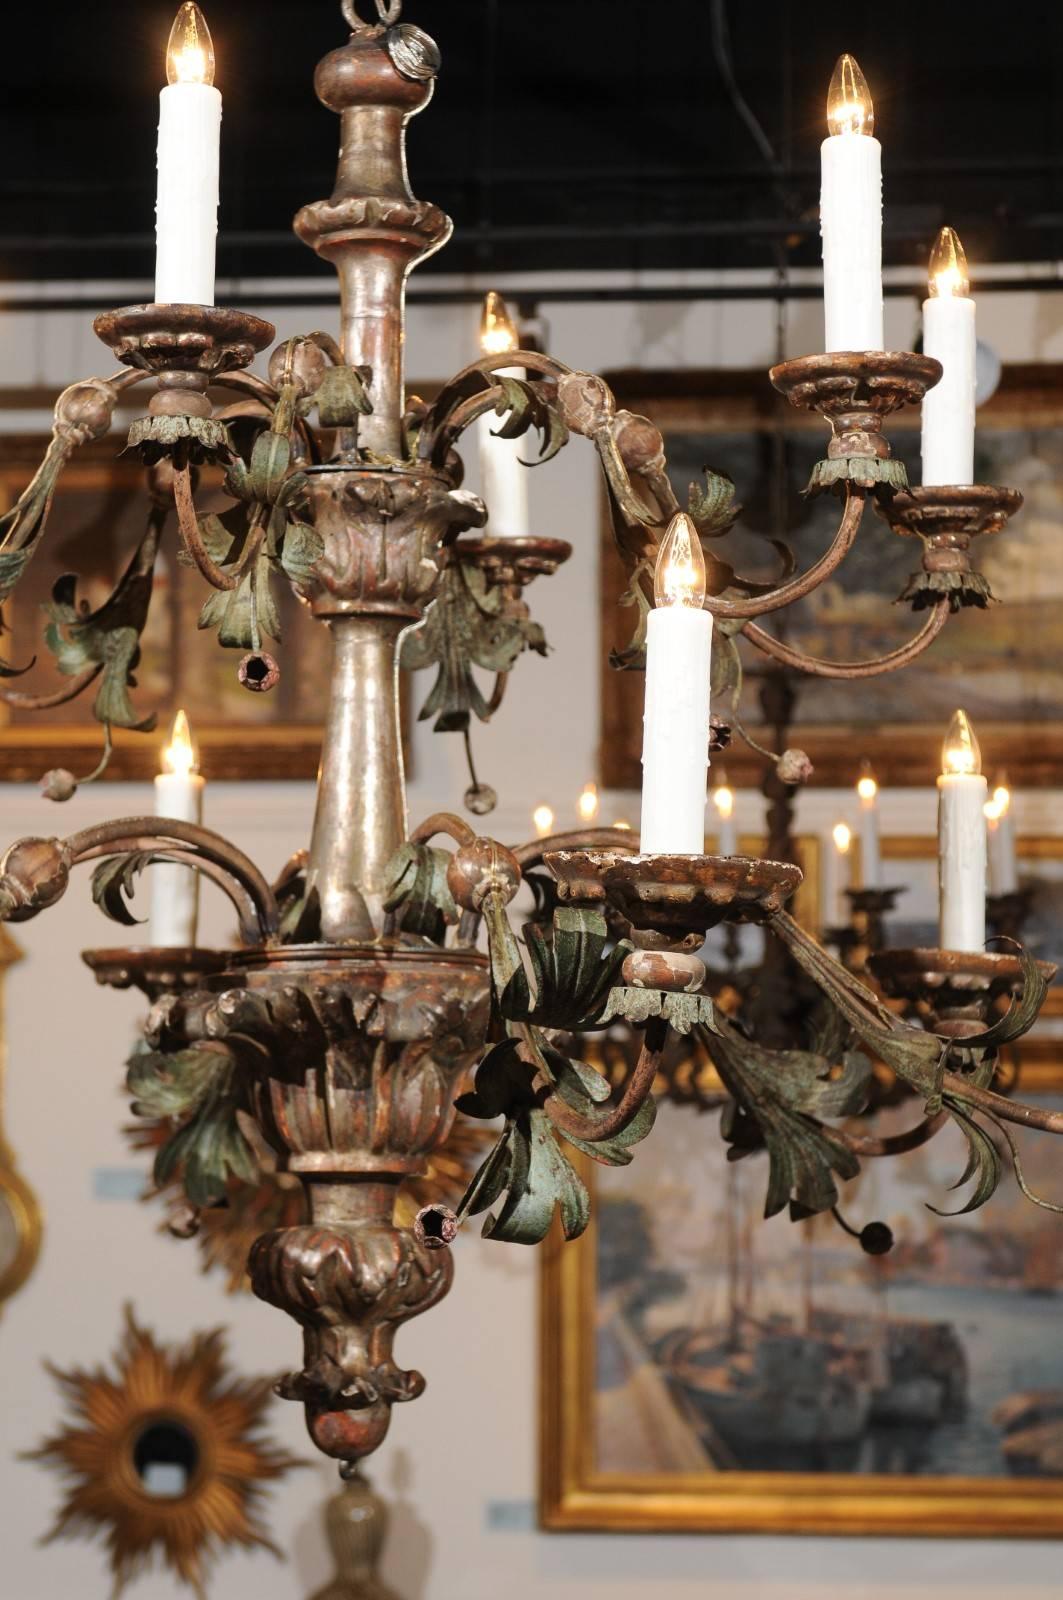 Italian Silver Gilt and Painted Tole 12-Light Chandelier from the Tuscany Region 1